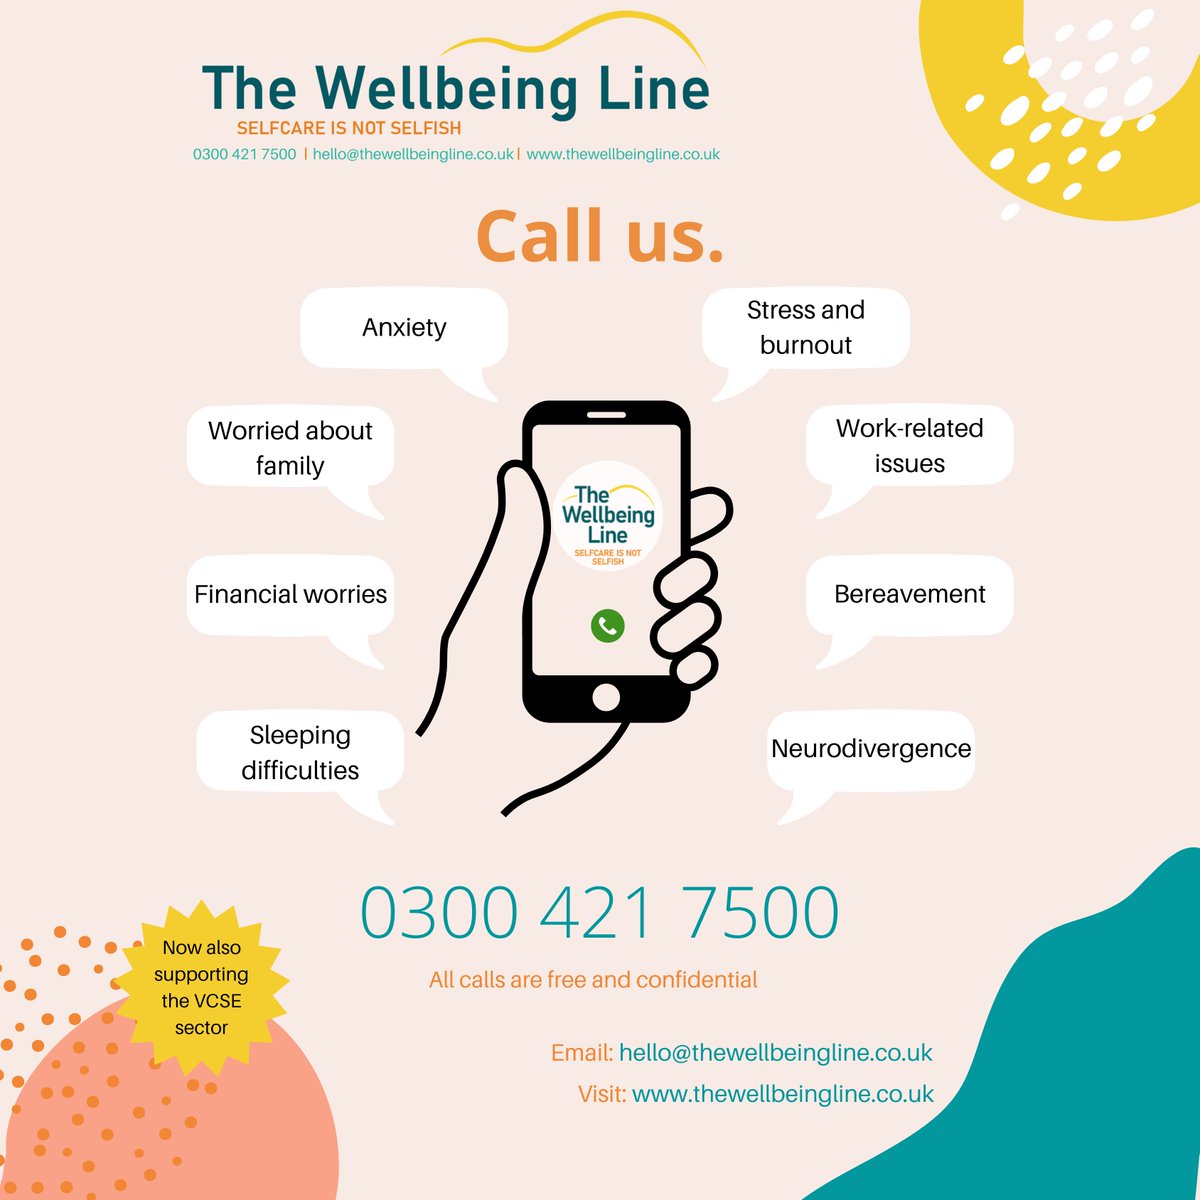 Call us 📞 No problem is too small, we are here to support you. Our phone lines are open from: Monday - Thursday: 09:00am - 4:30pm Friday: 09:00am - 12:00pm.